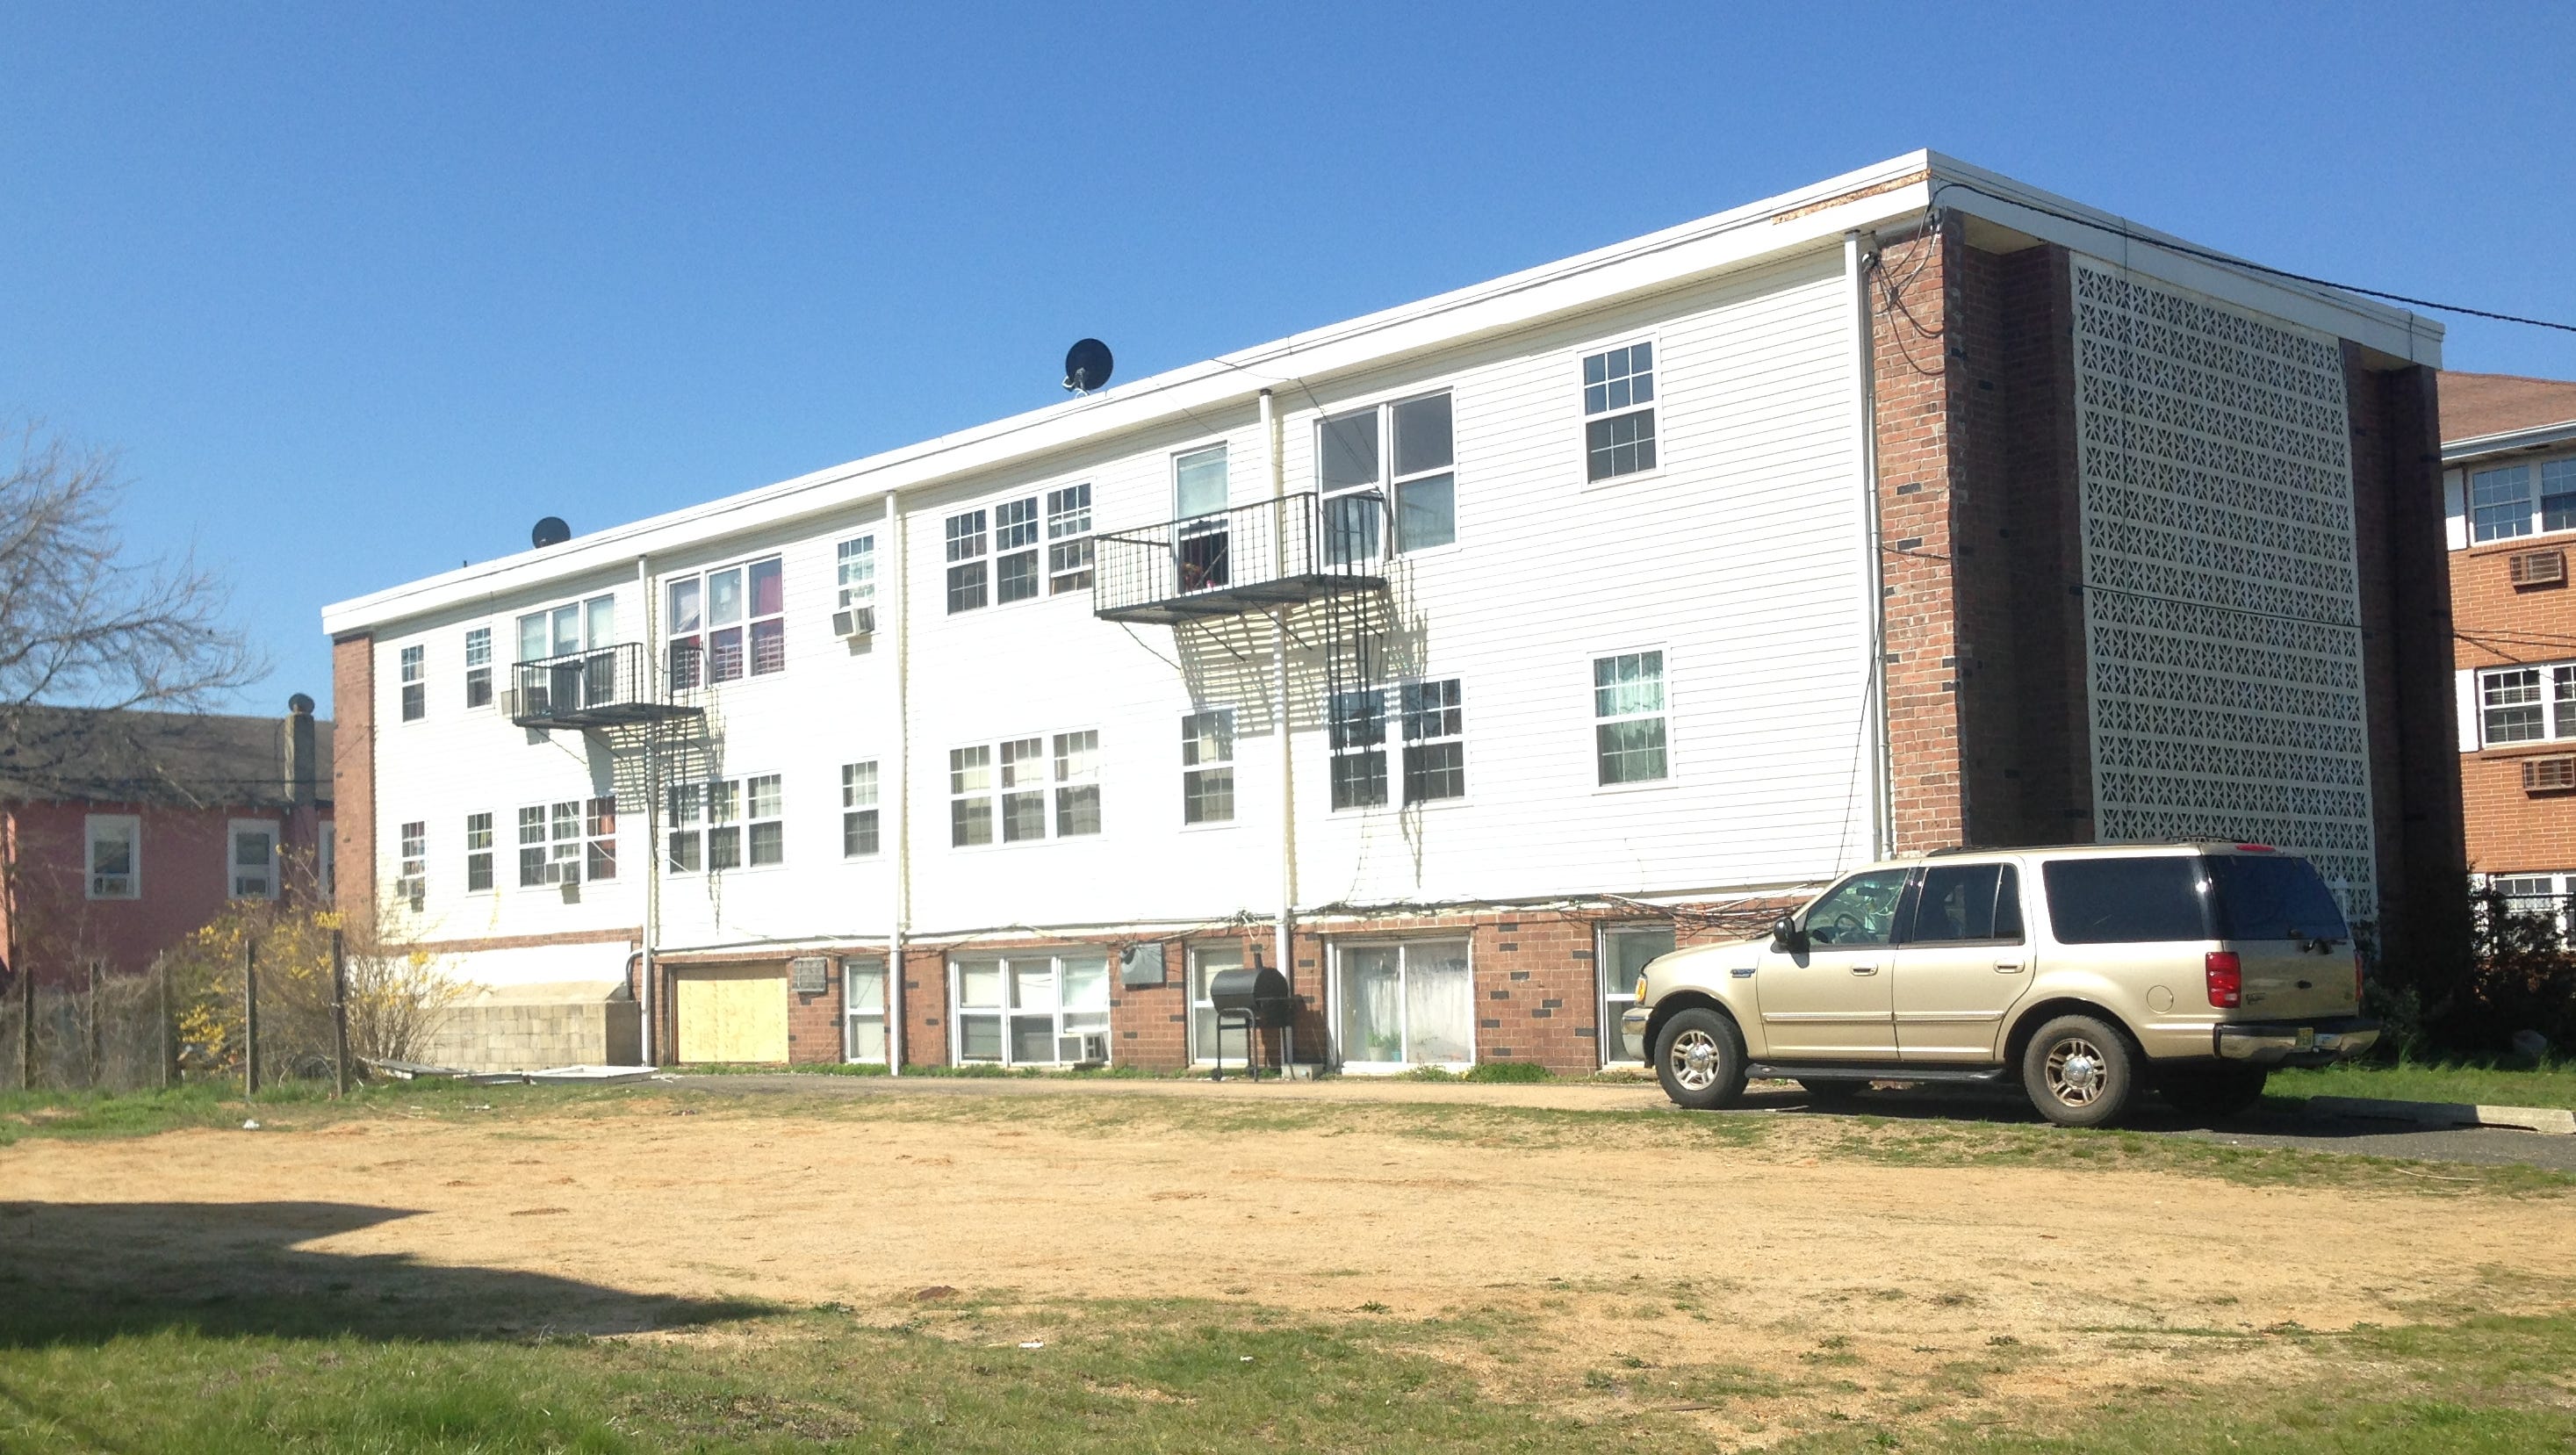 Fire marshal flags violations at deteriorating Eastside apartment complexes